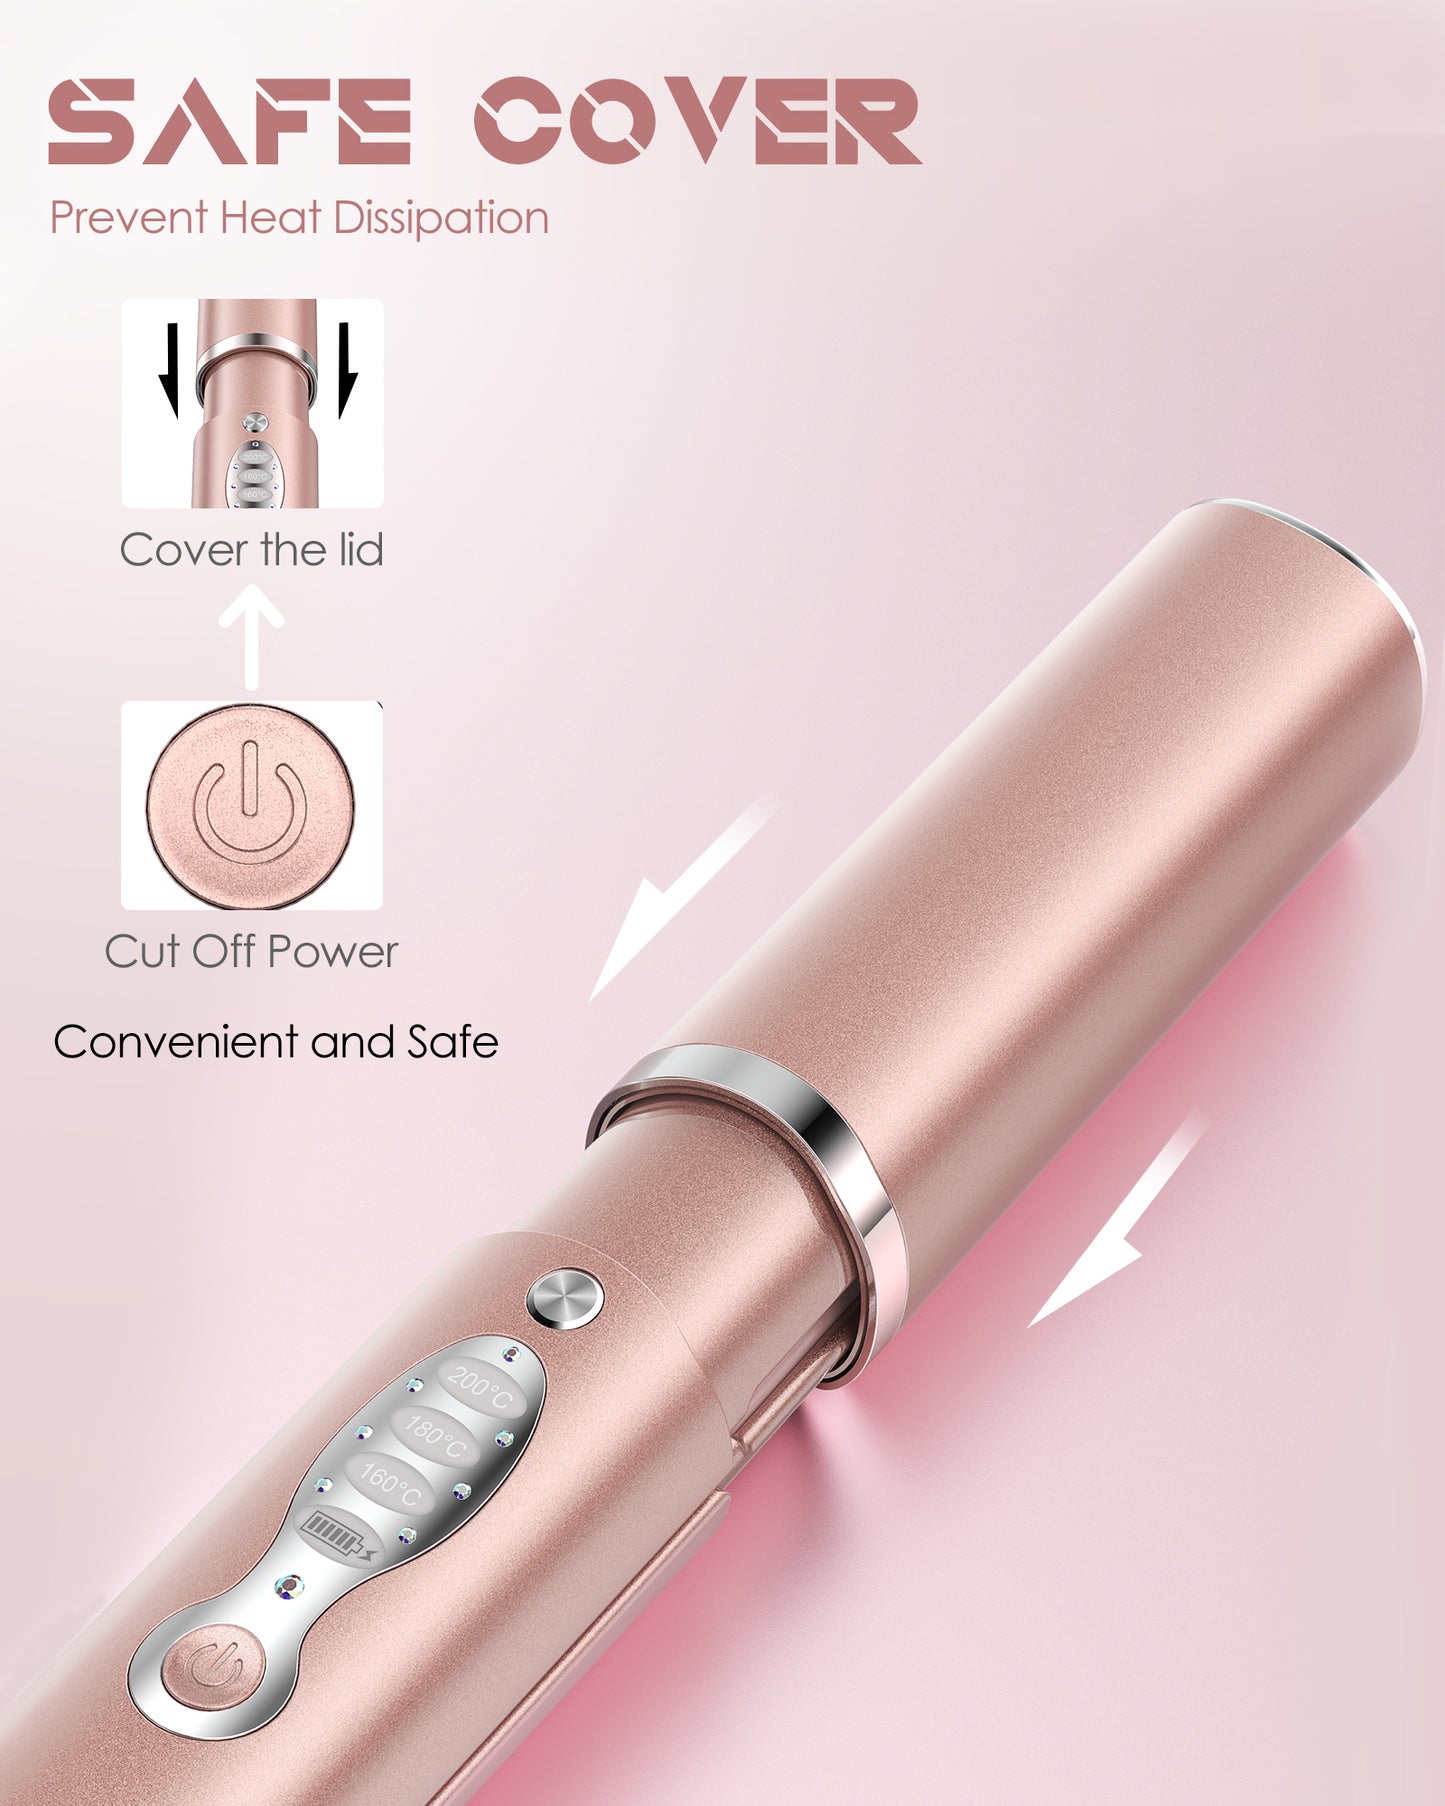 JMFONE URJD Cordless Hair Straightener and Curler 2 in 1, Heats Up to 410℉ Quickly & Lasts Up to 50 Minutes, Portable Mini Travel Flat Iron Hair Straightening Irons for Thin Straight Fine Hair Types